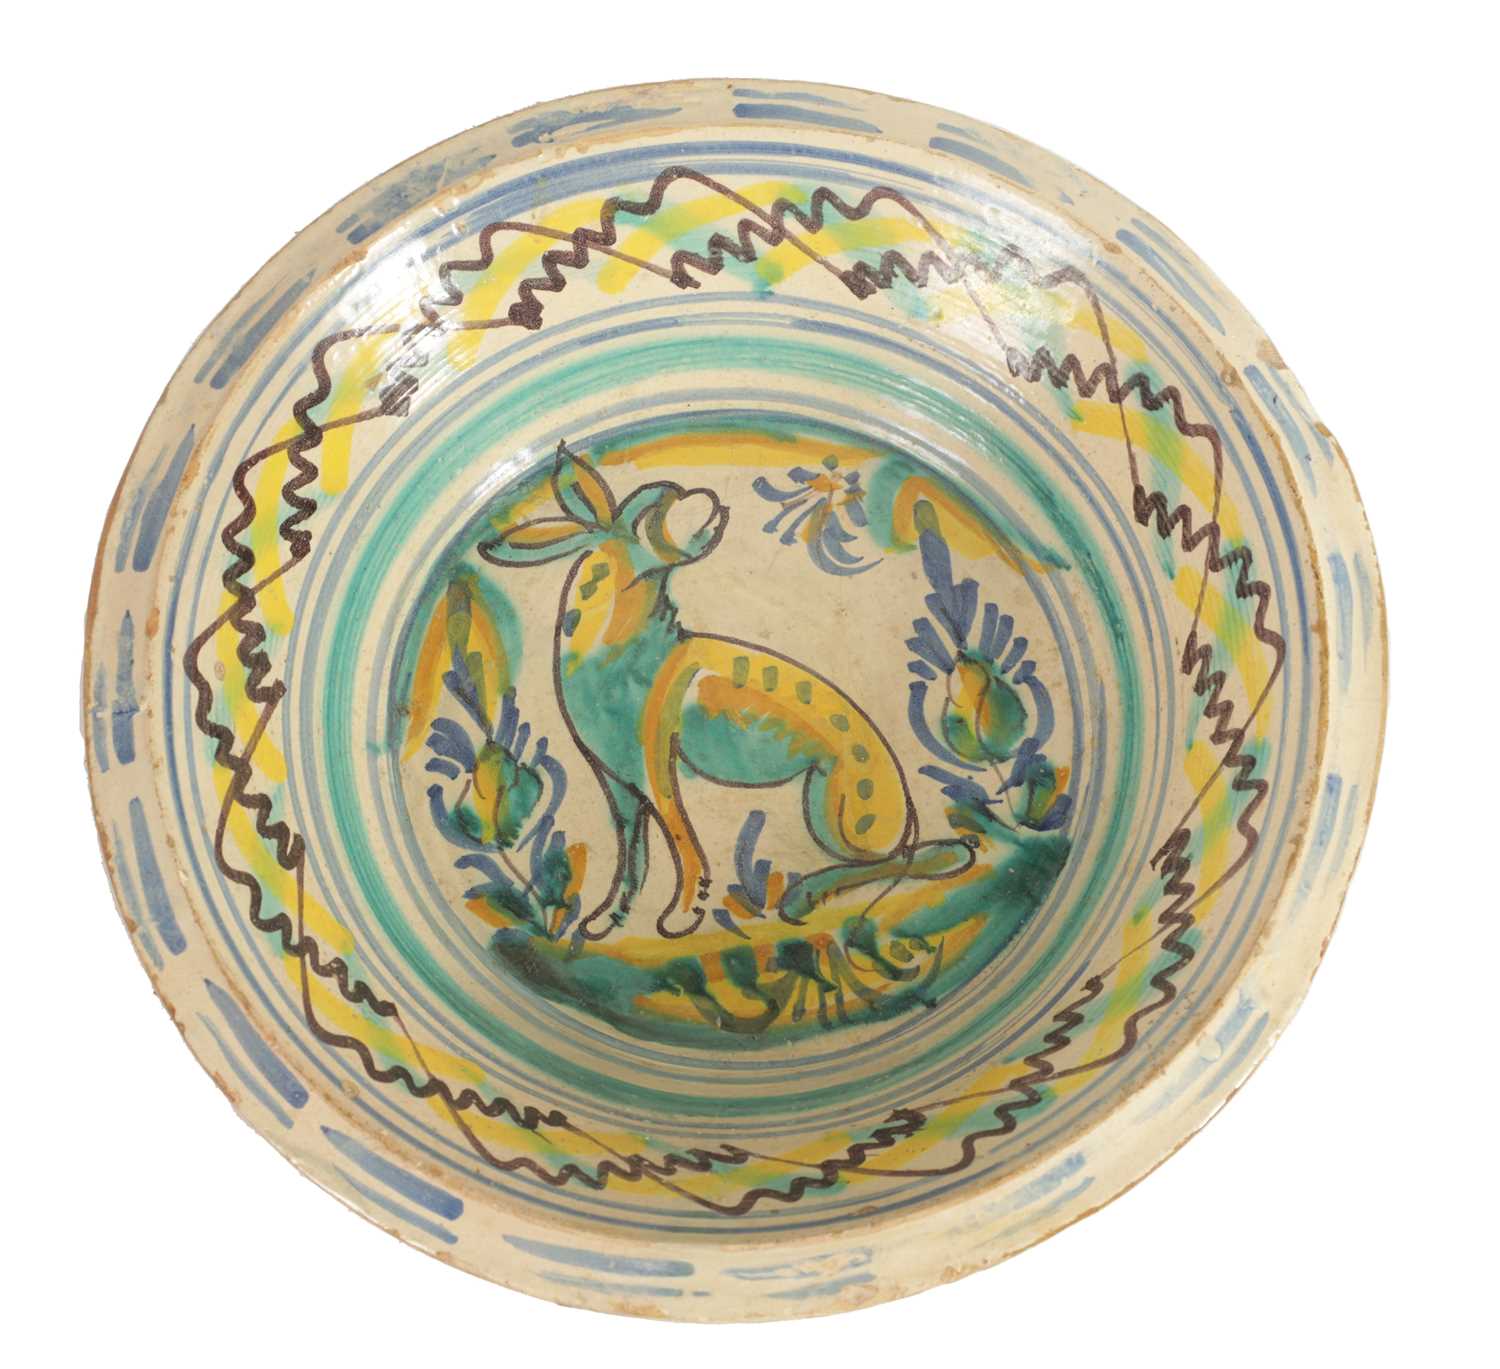 Lot 31 - AN EARLY SPANISH LEBRILLO CERAMIC CHARGER